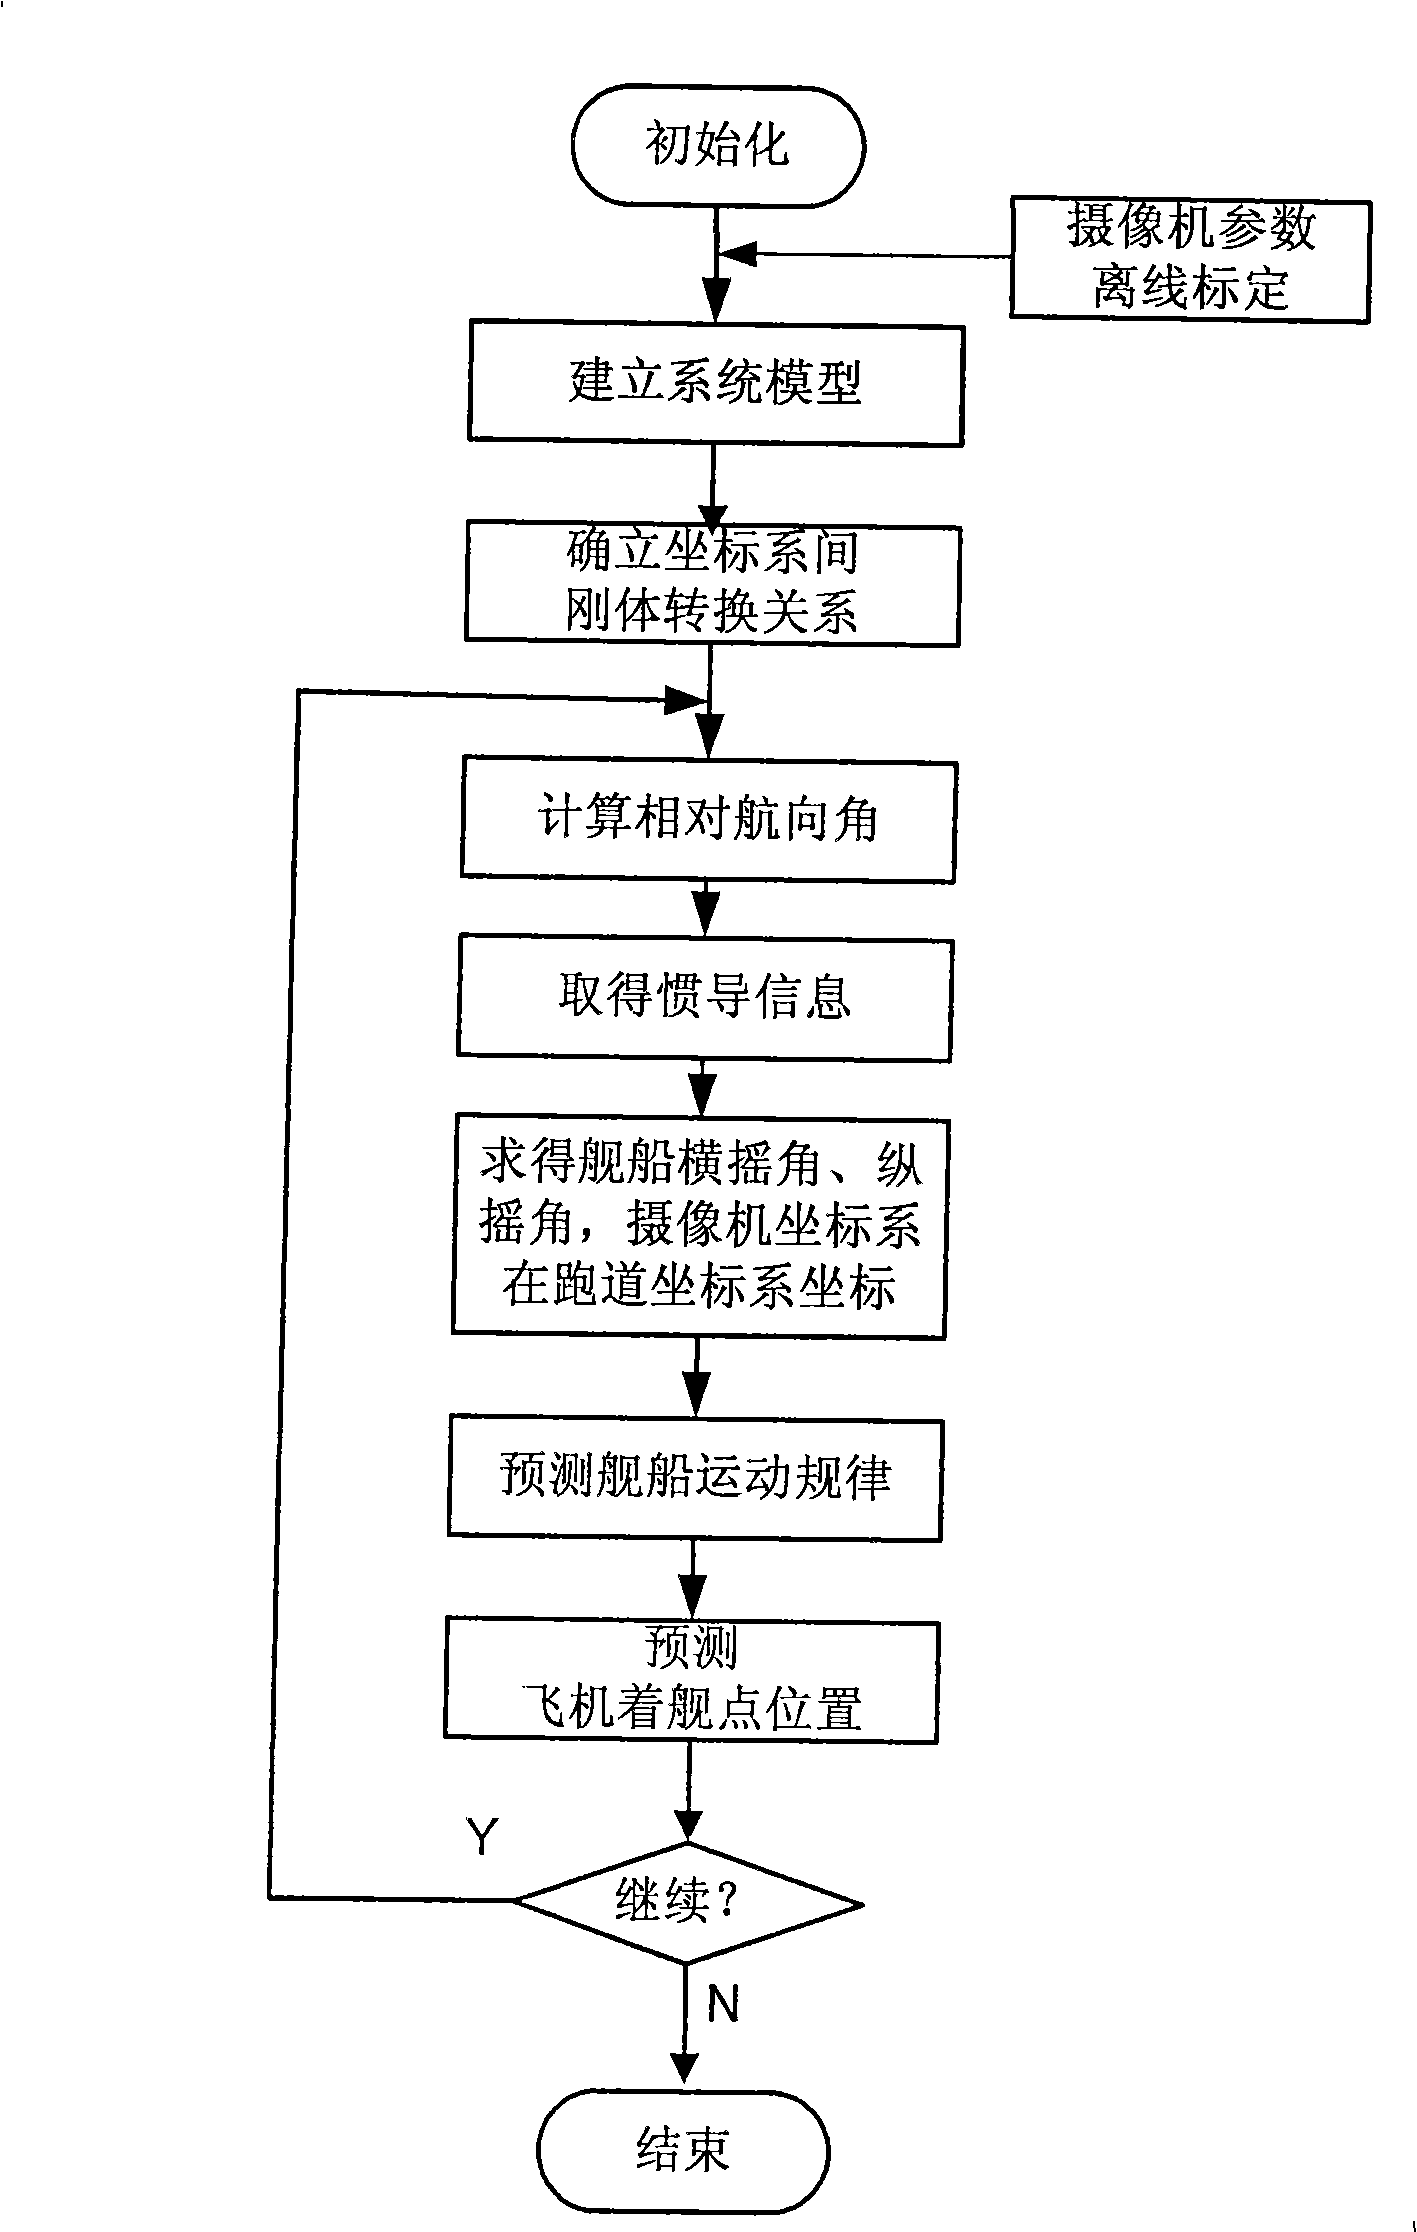 Photoelectric guide emulation system for ship